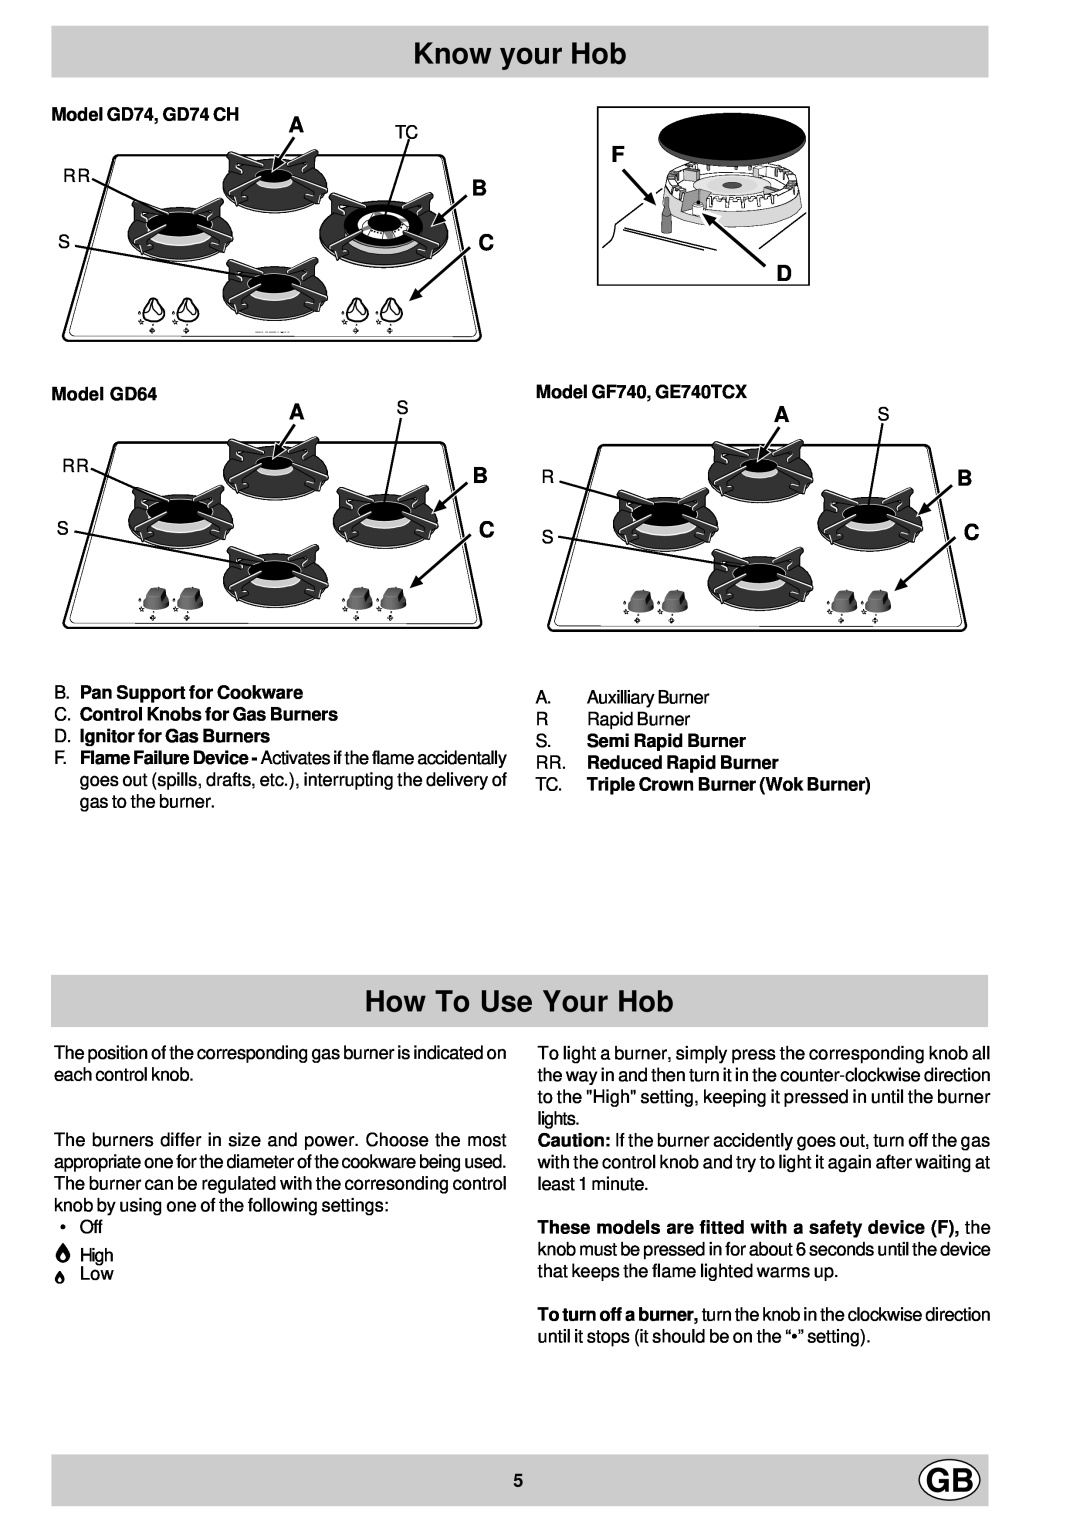 Hotpoint manual Know your Hob, How To Use Your Hob, F B C D, Model GD74, GD74 CH, Model GD64, Model GF740, GE740TCX 